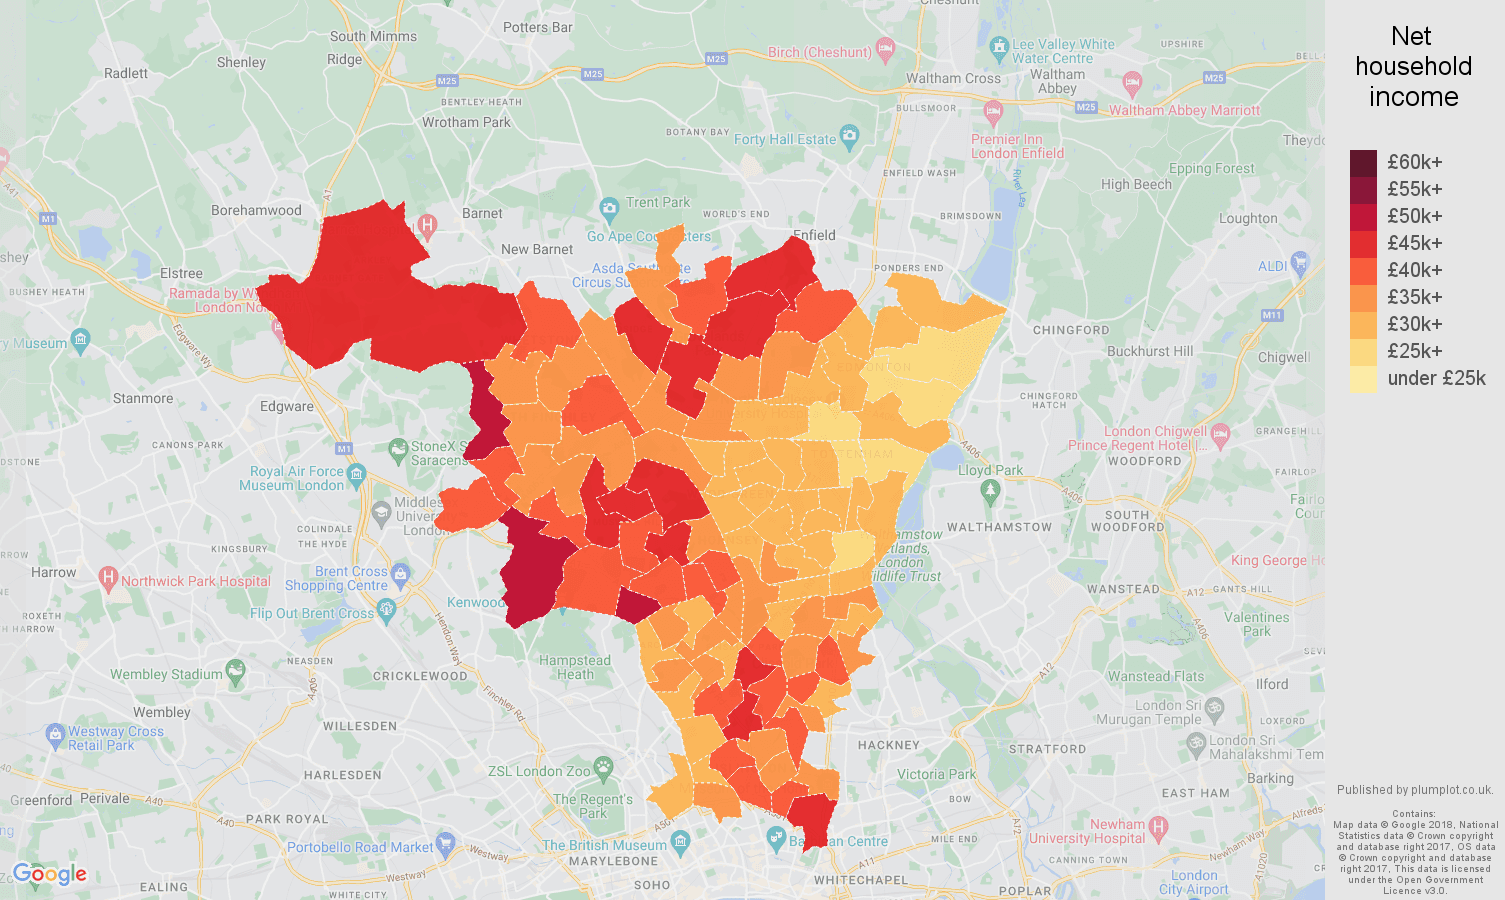 North London net household income map